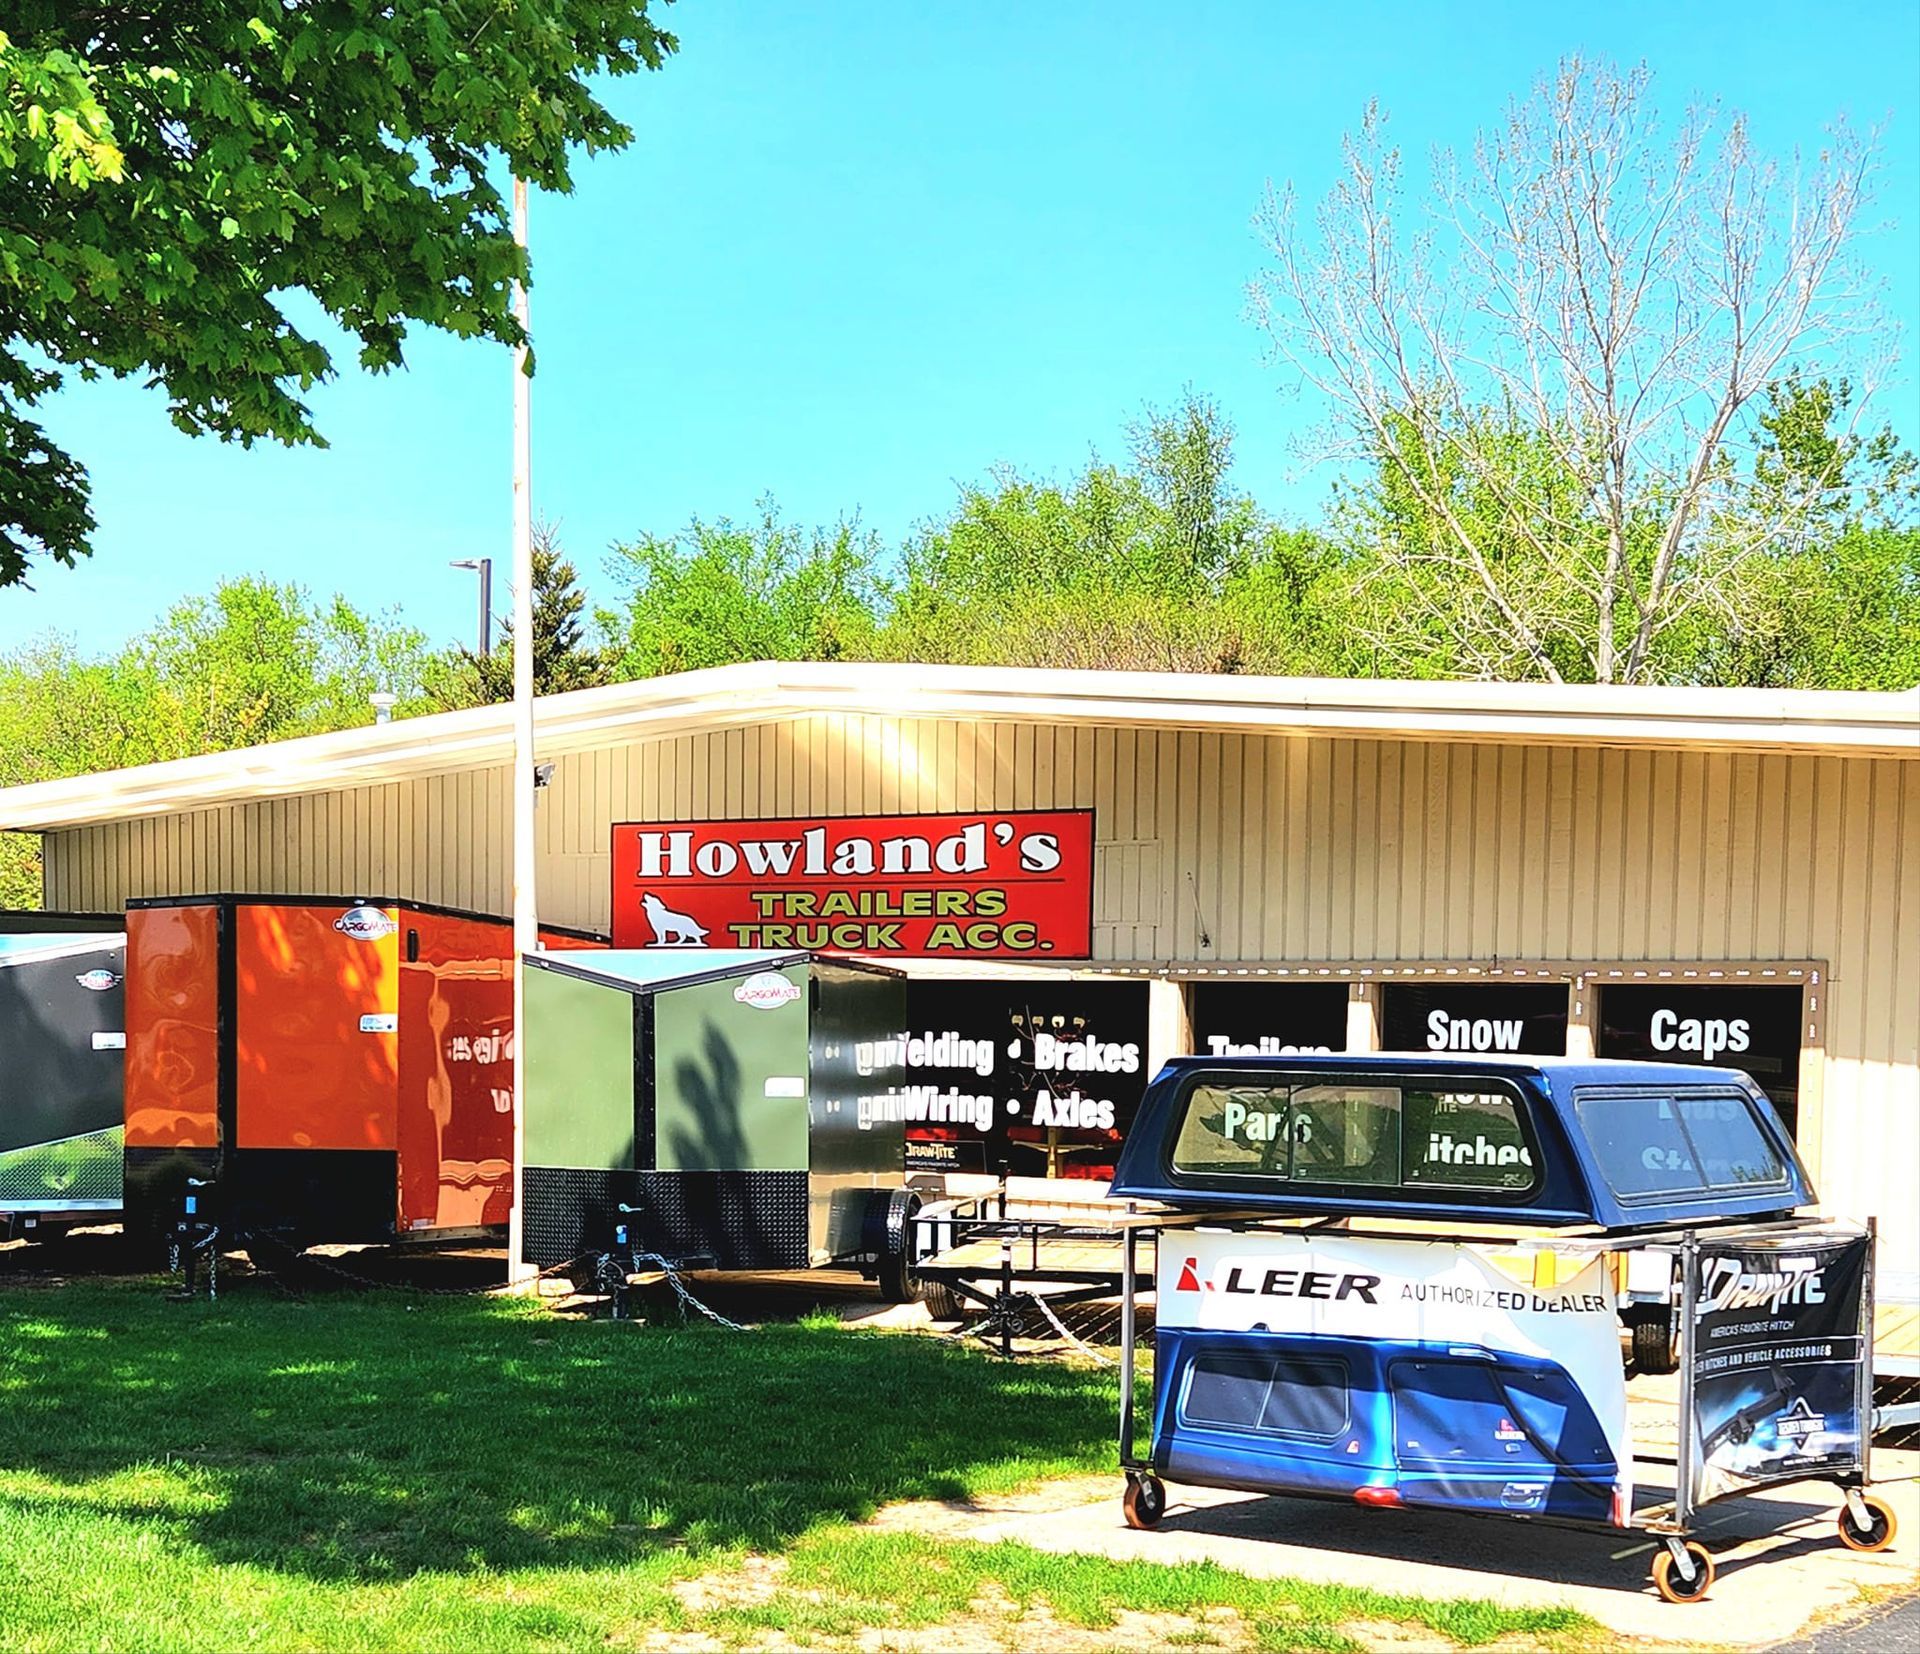 a truck is parked in front of a trailer dealership called Howland's Trailer and Trucks Accessories